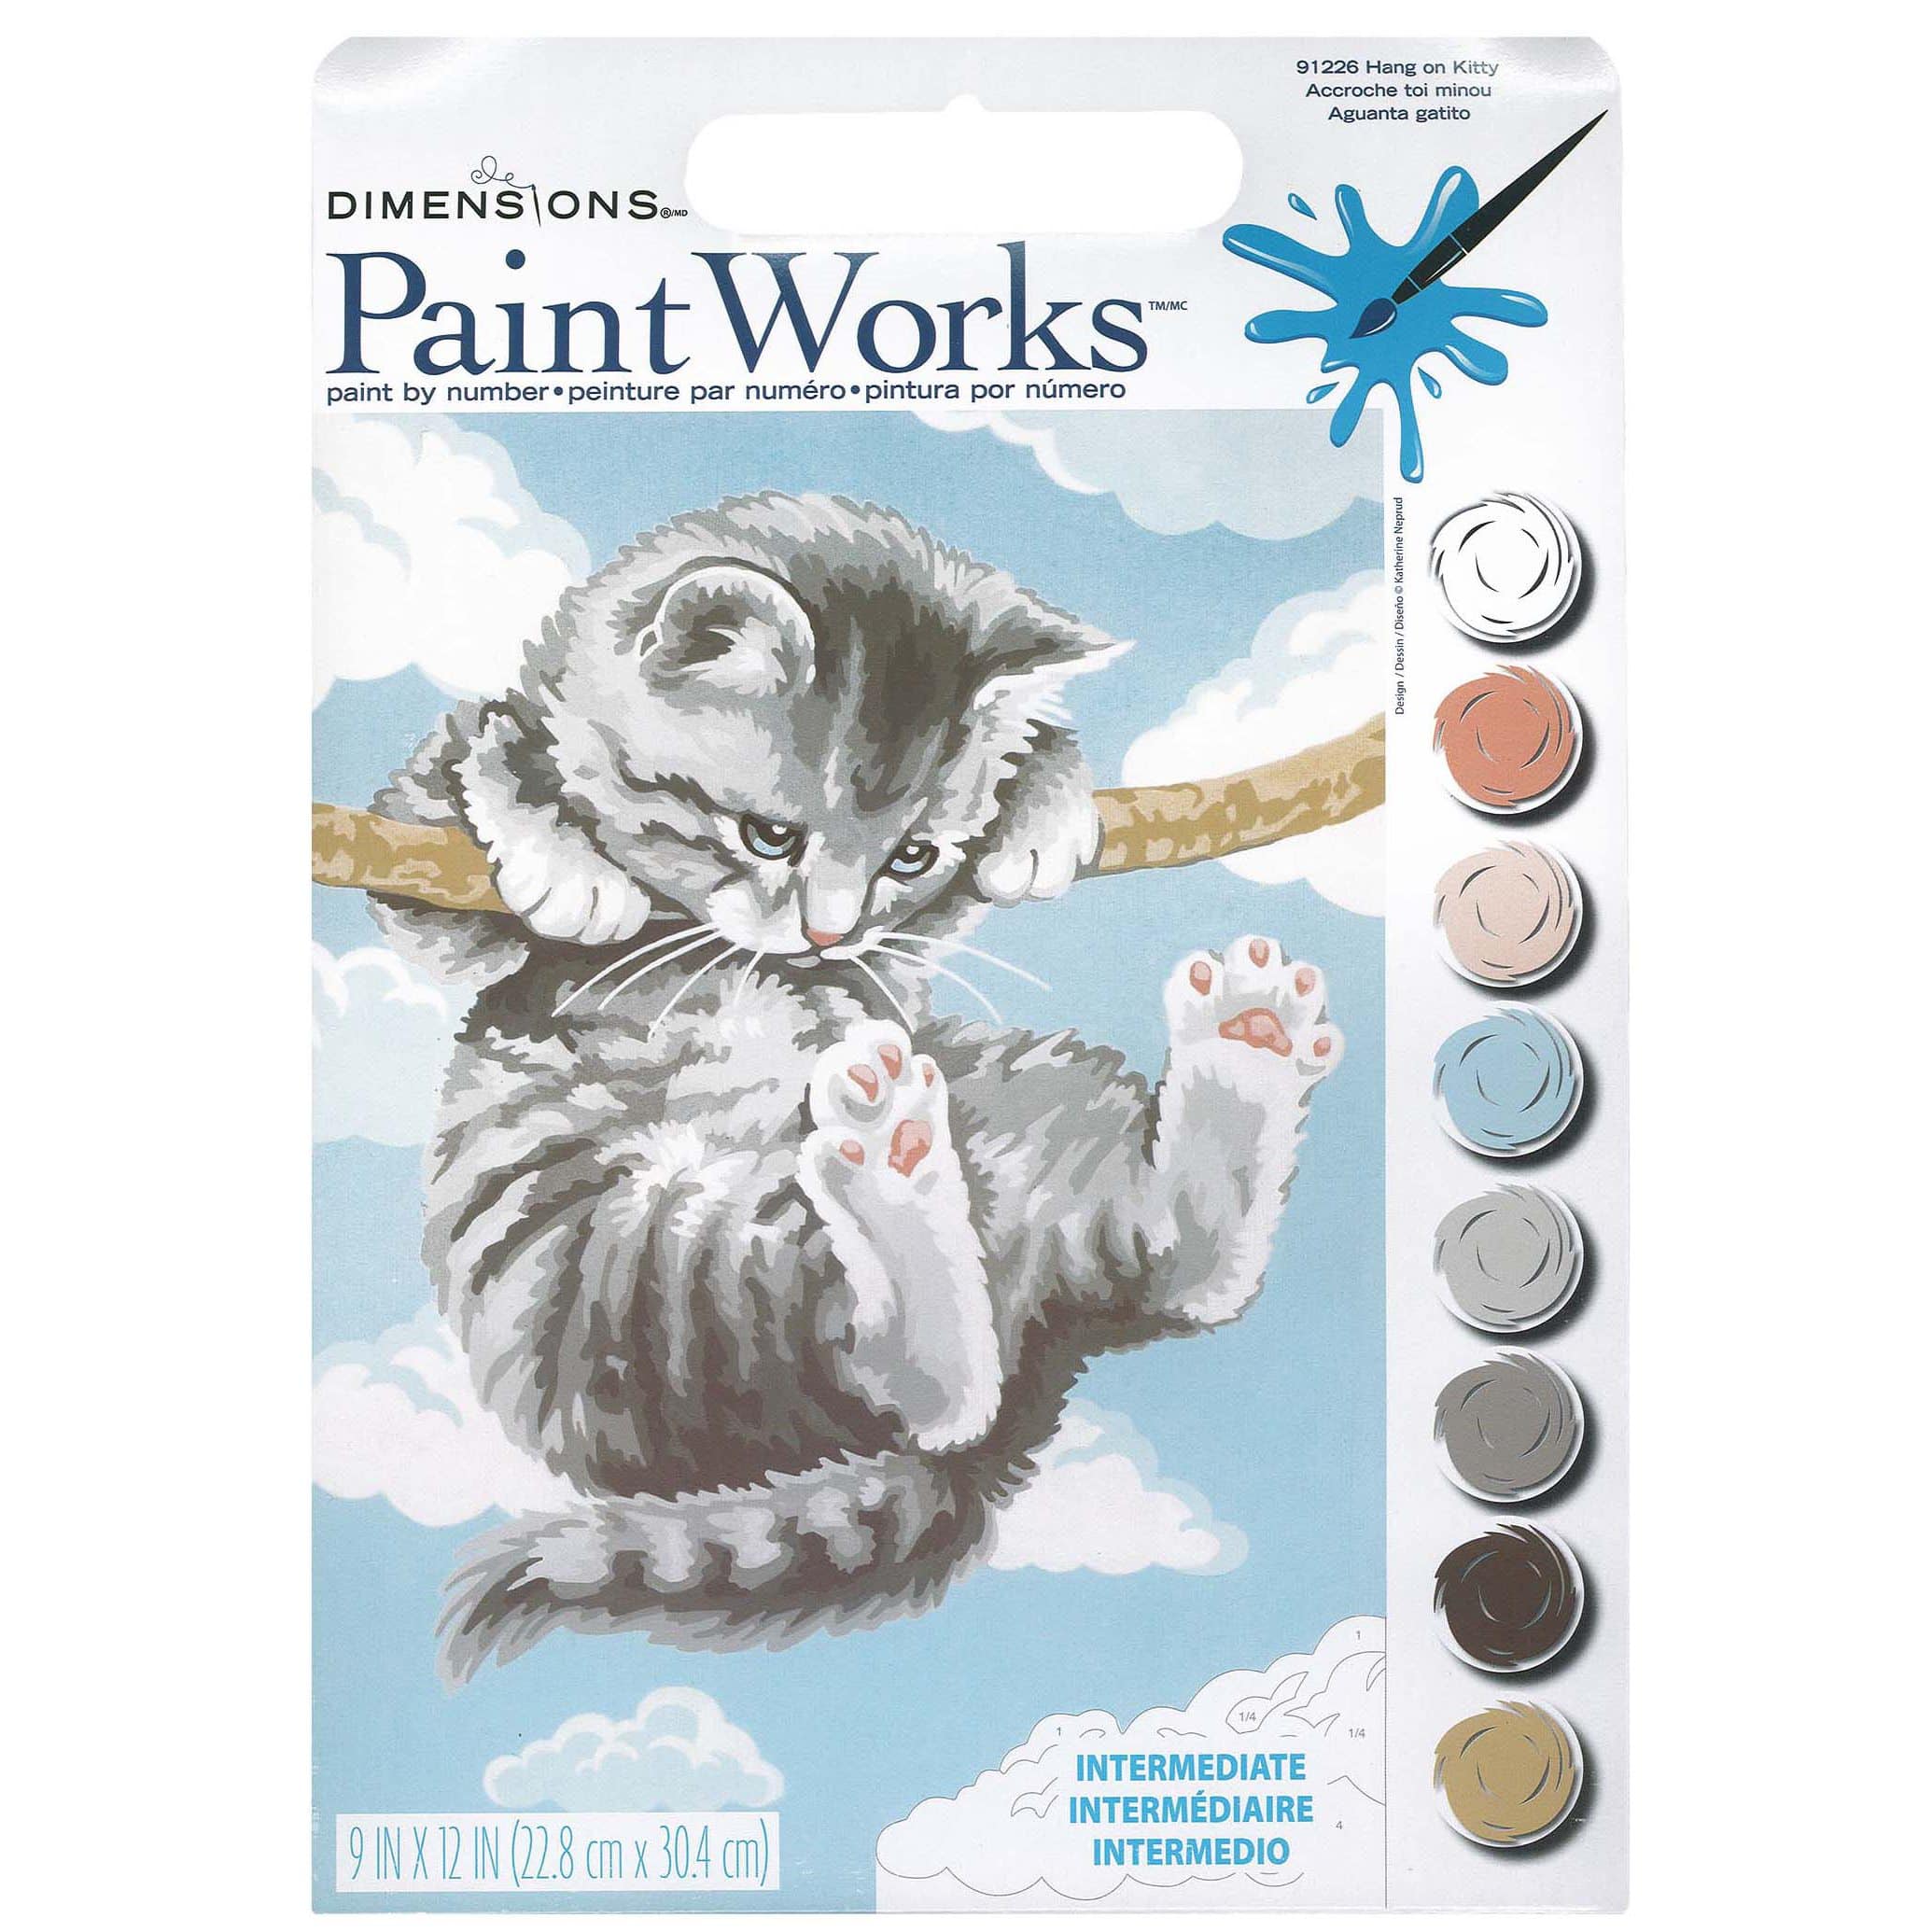 Dimensions Paint Works Paint by Number Kit 